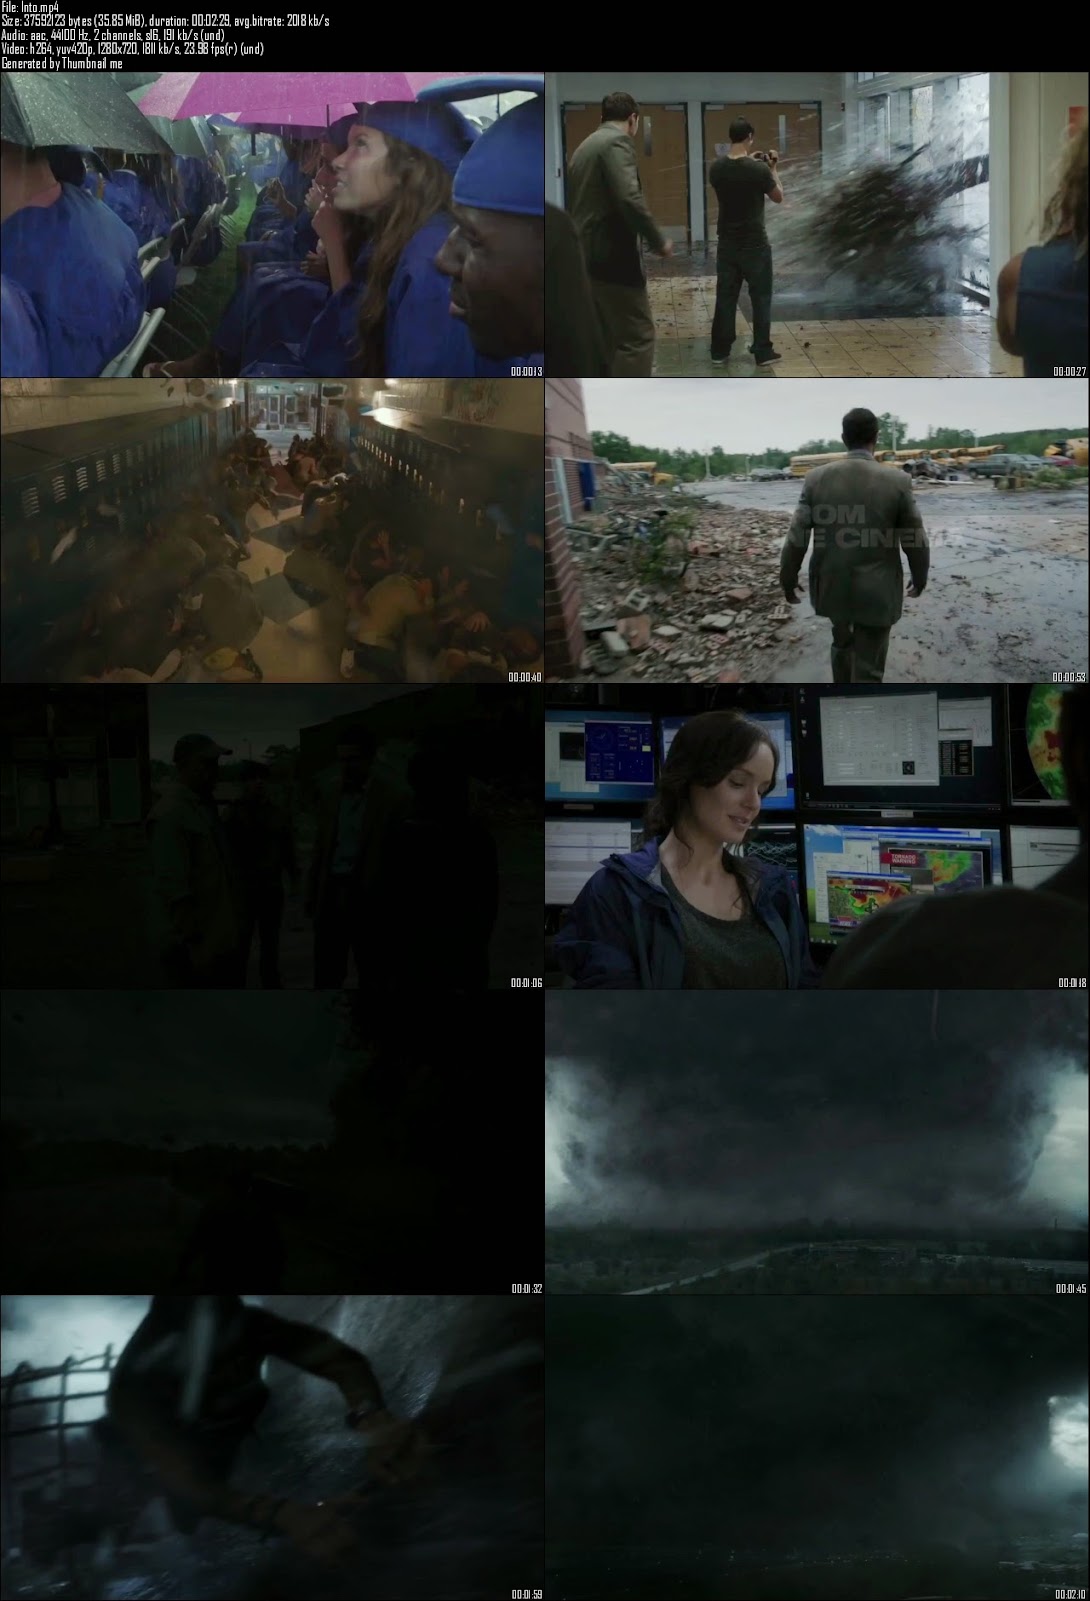 Mediafire Resumable Download Link For Teaser Promo Of Into the Storm (2014)